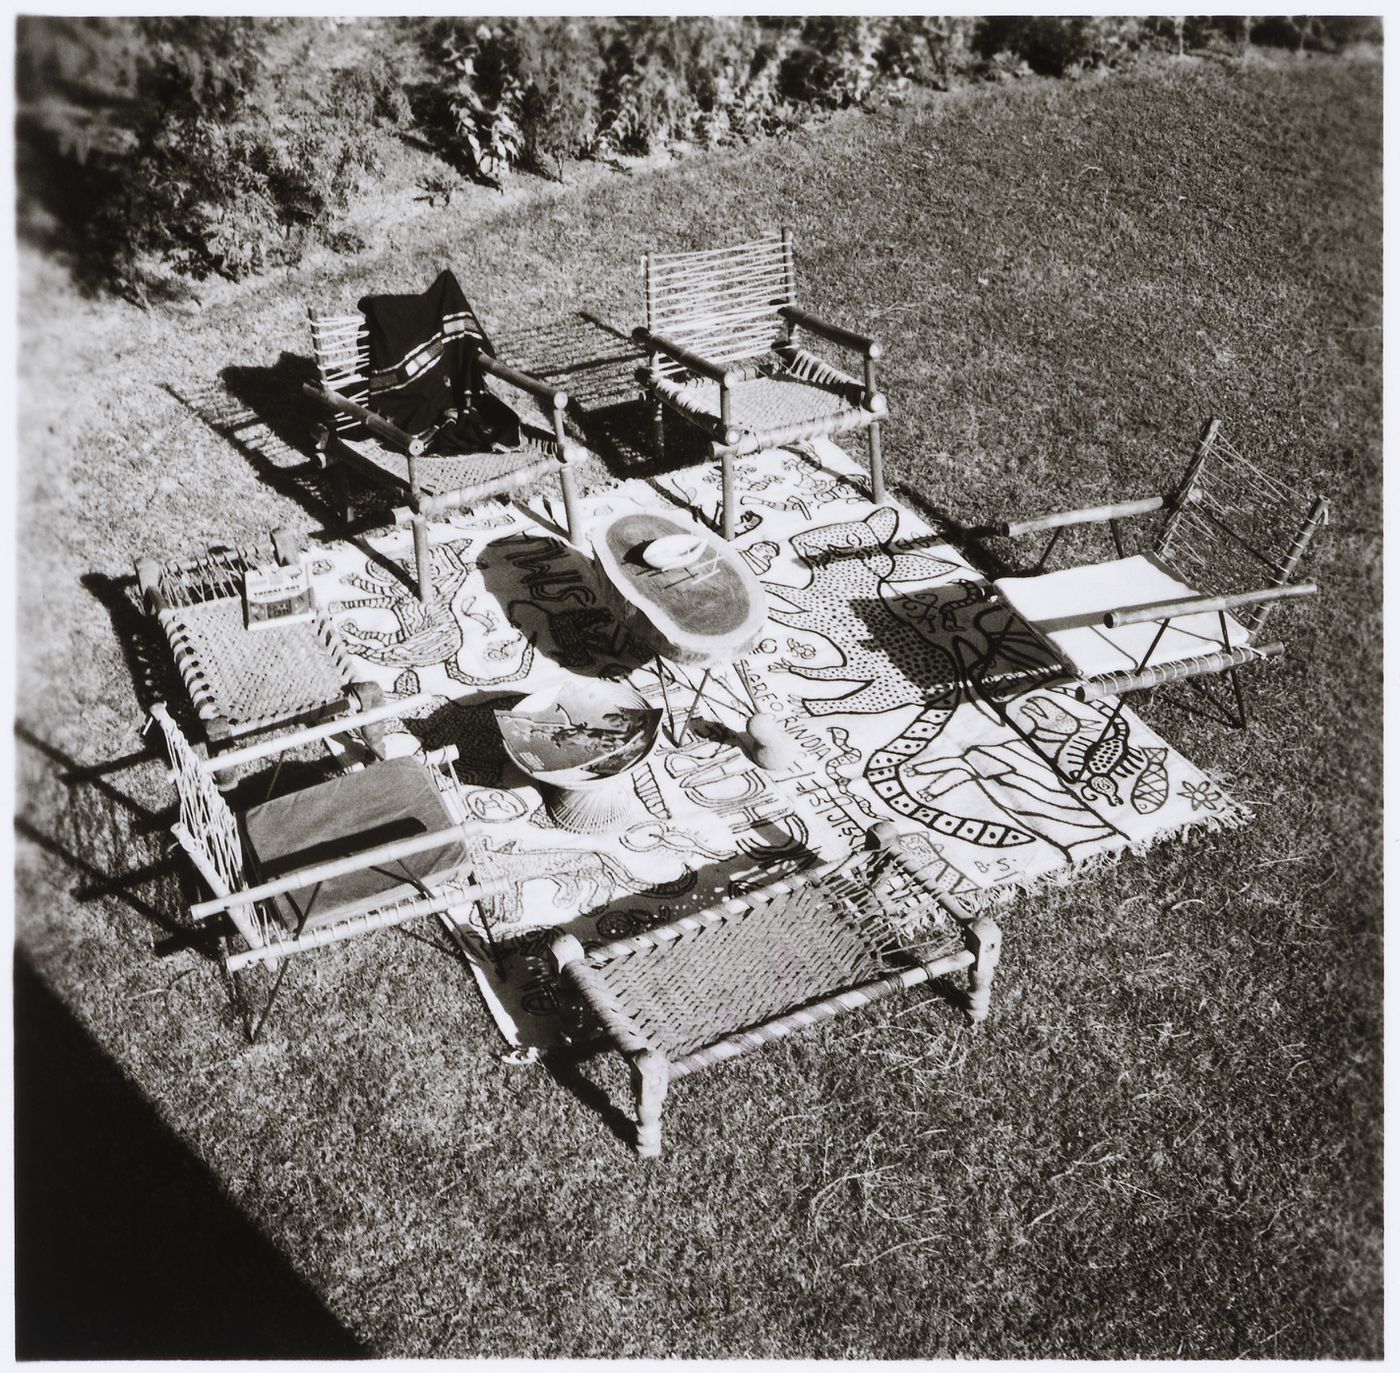 Furniture designed by Pierre Jeanneret in Chandigarh, India